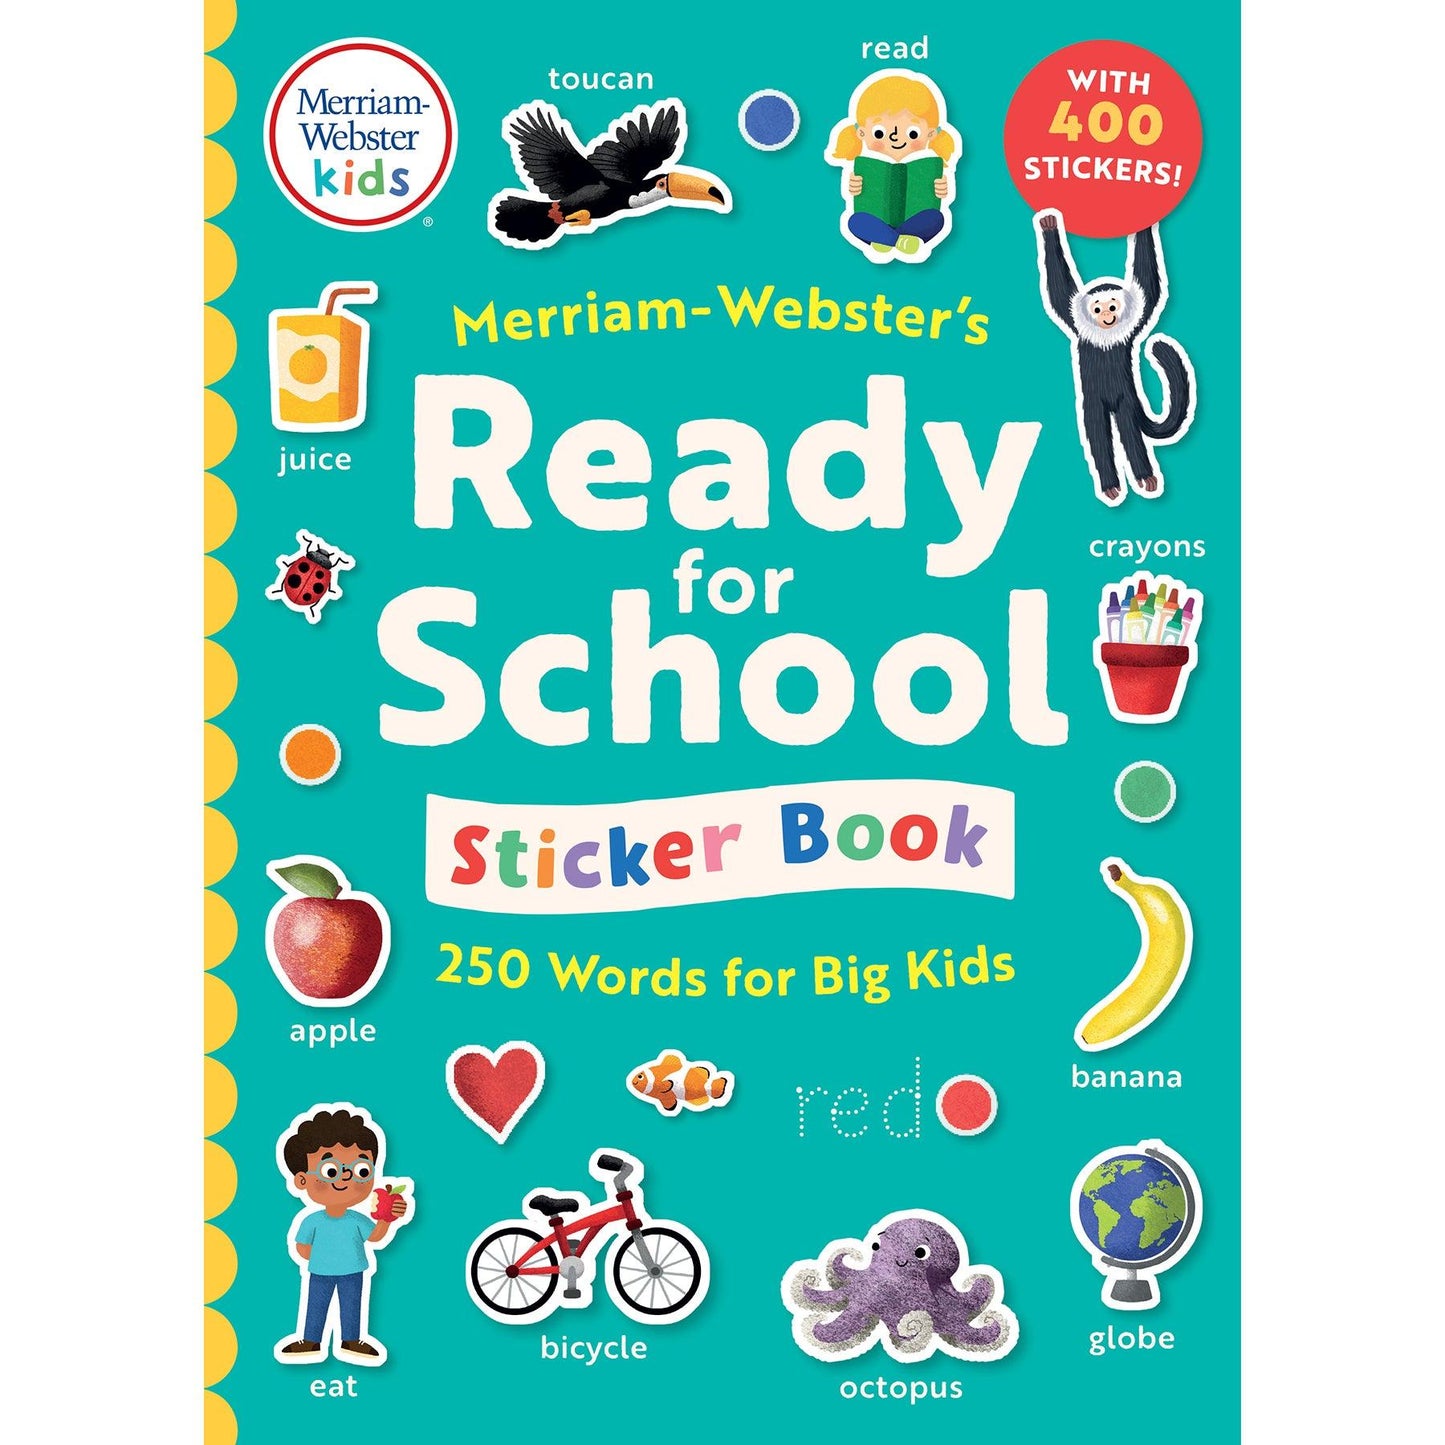 Merriam-Webster's Ready-for-School Sticker Book, Pack of 2 - Loomini